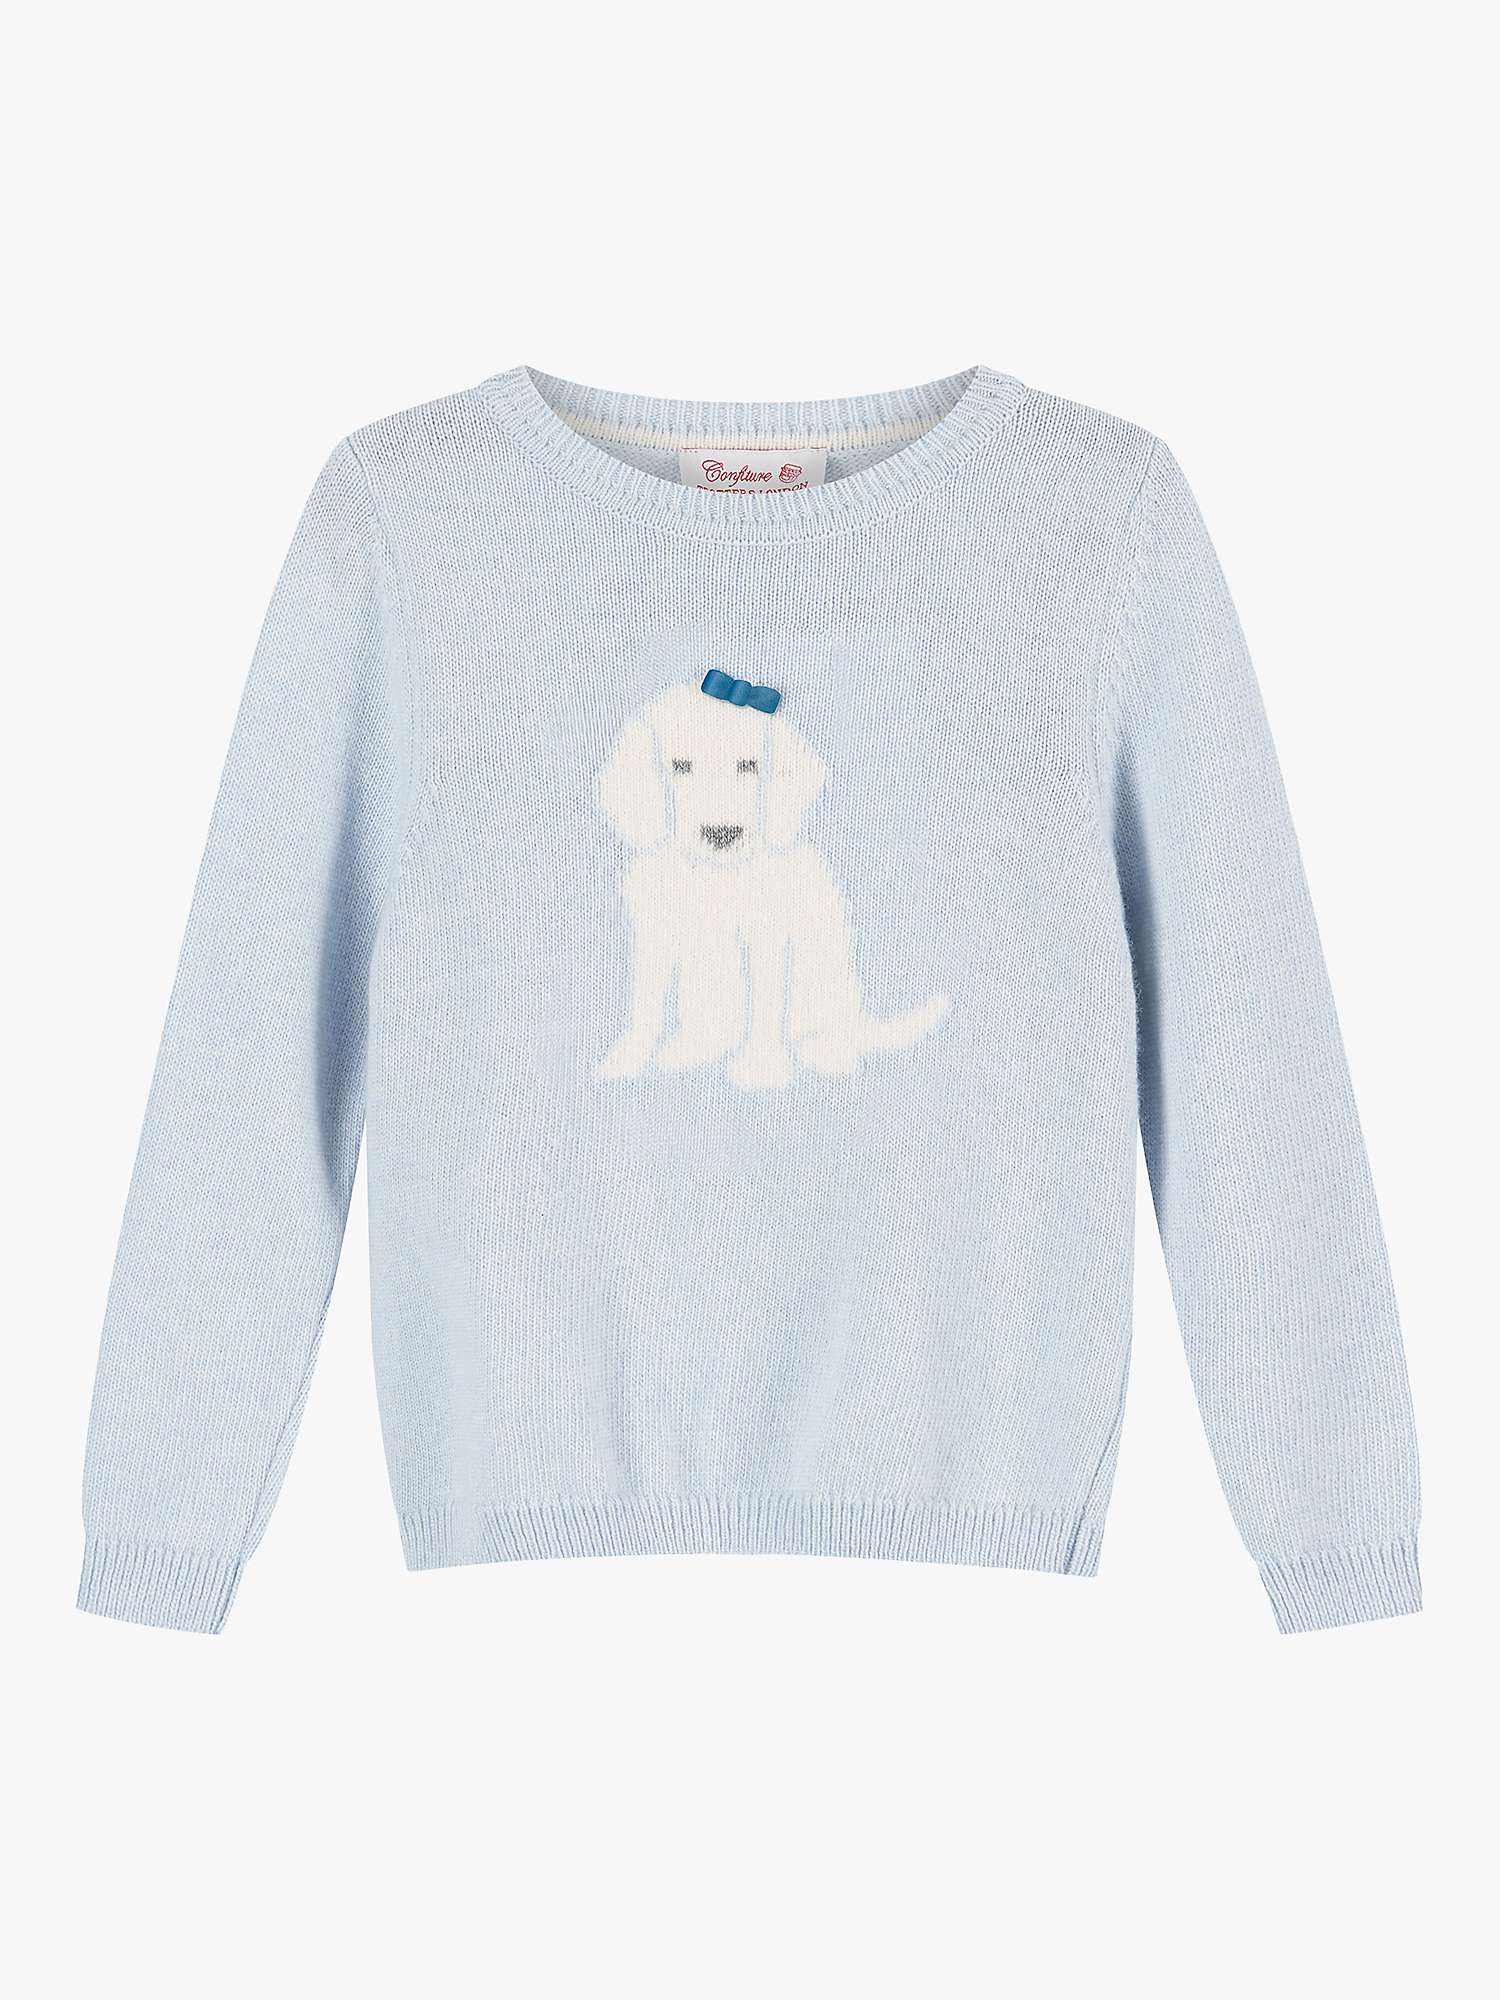 Buy Trotters Wool and Cashmere Blend Mina Puppy Jumper, Pale Blue Online at johnlewis.com